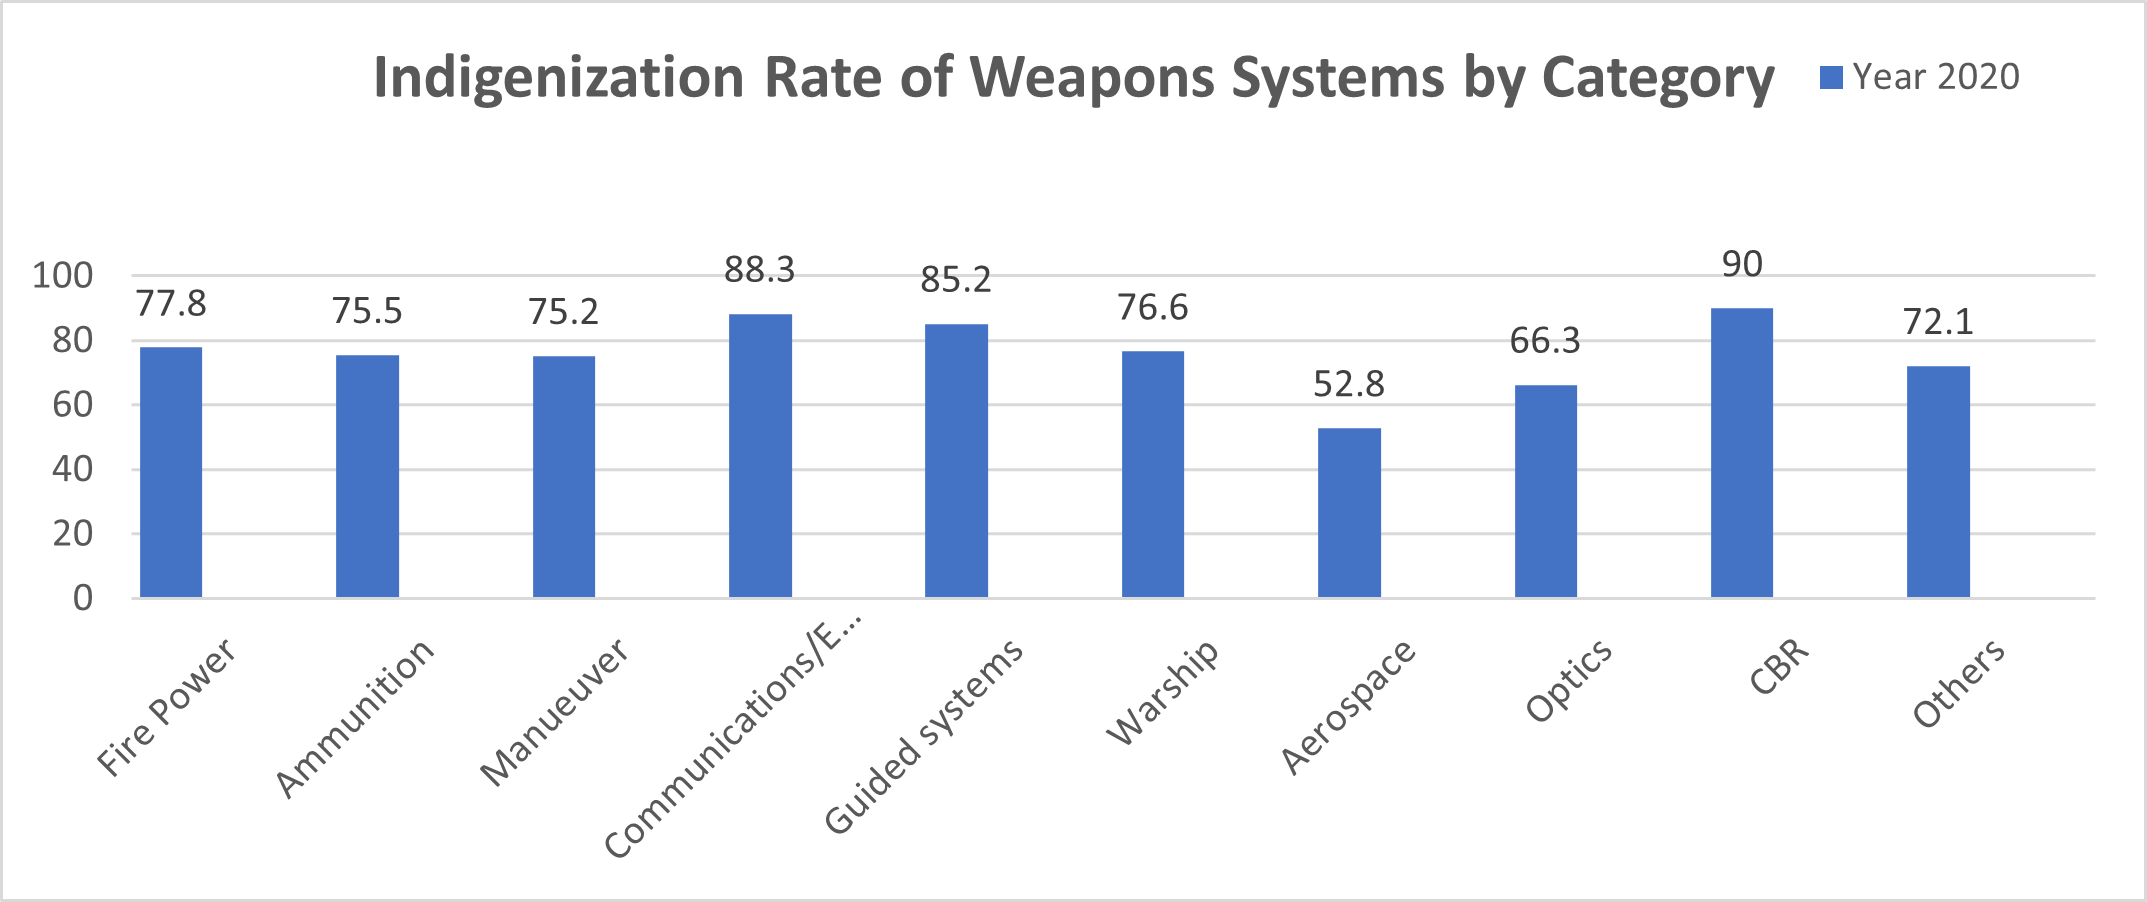 South Korea’s Indigenization Rate of Weapons Systems